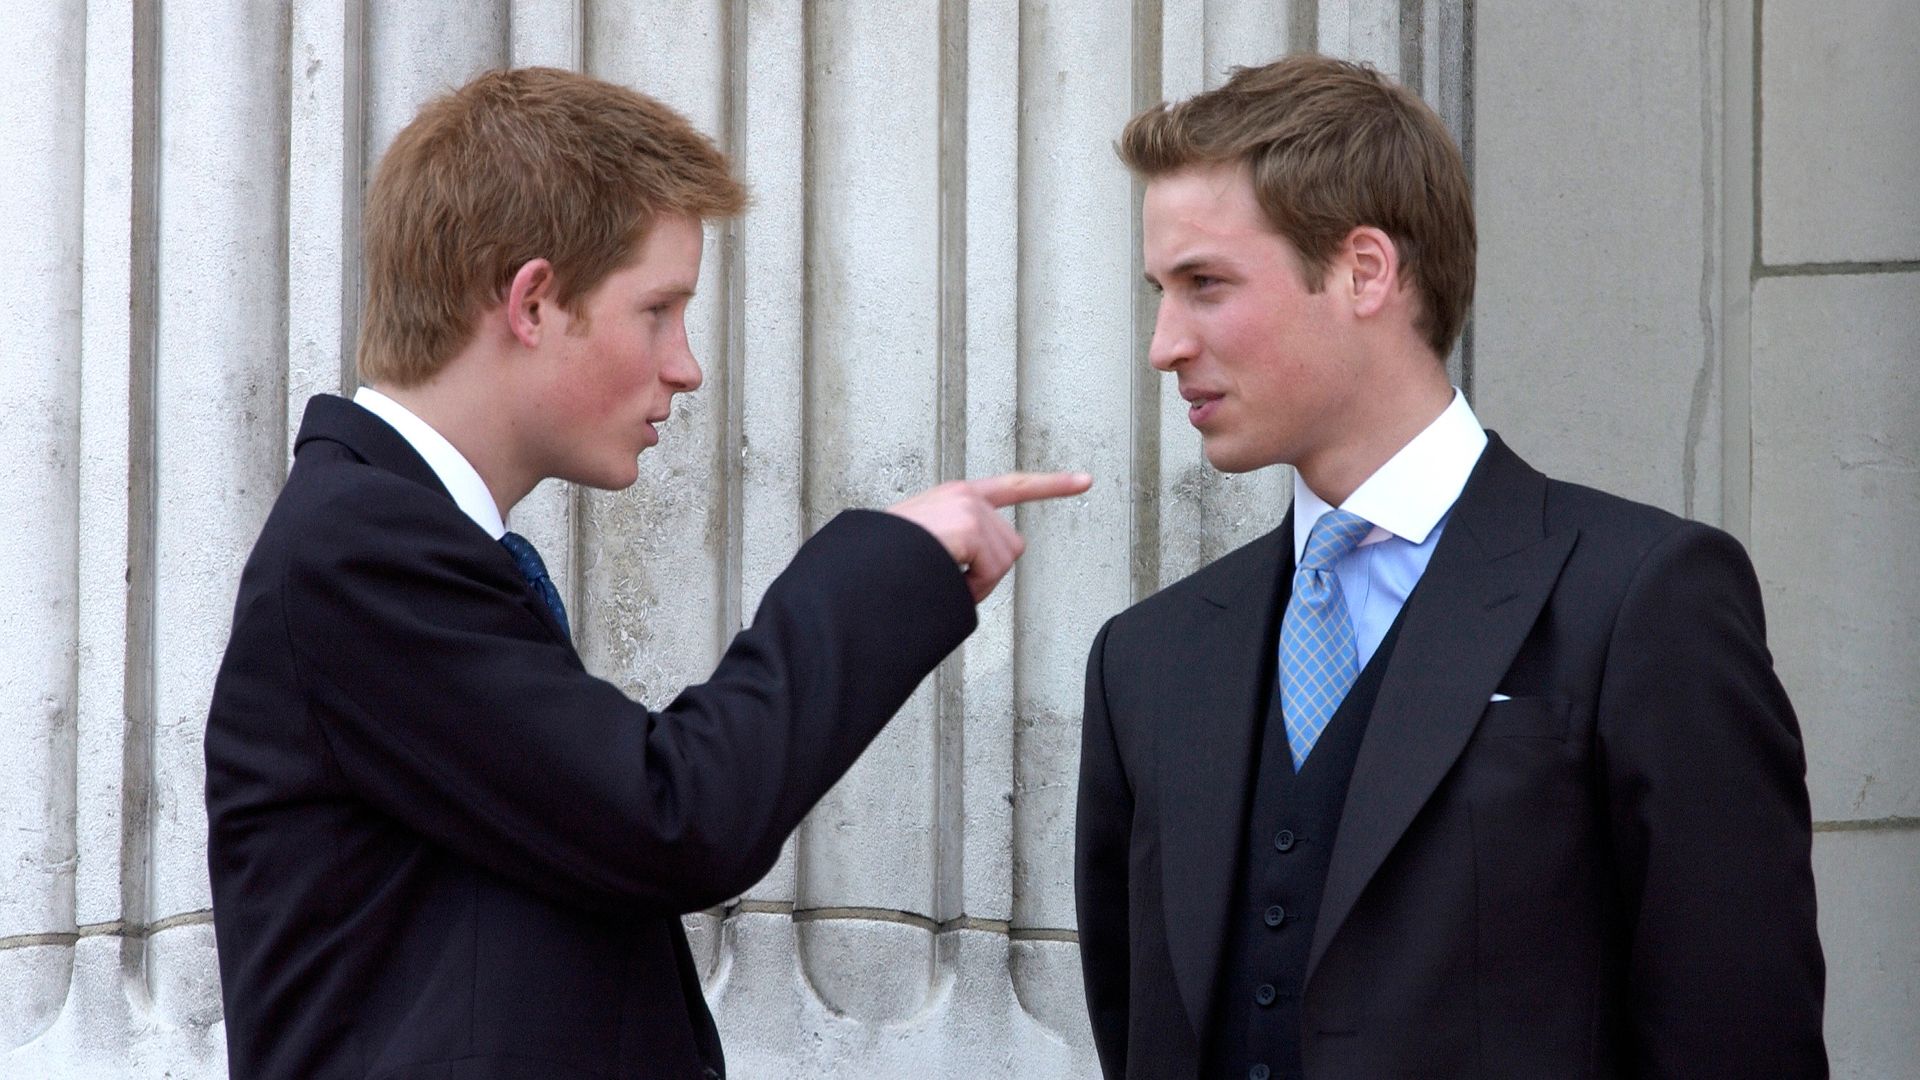 Prince Harry and Prince William in suits; Harry is pointing at William